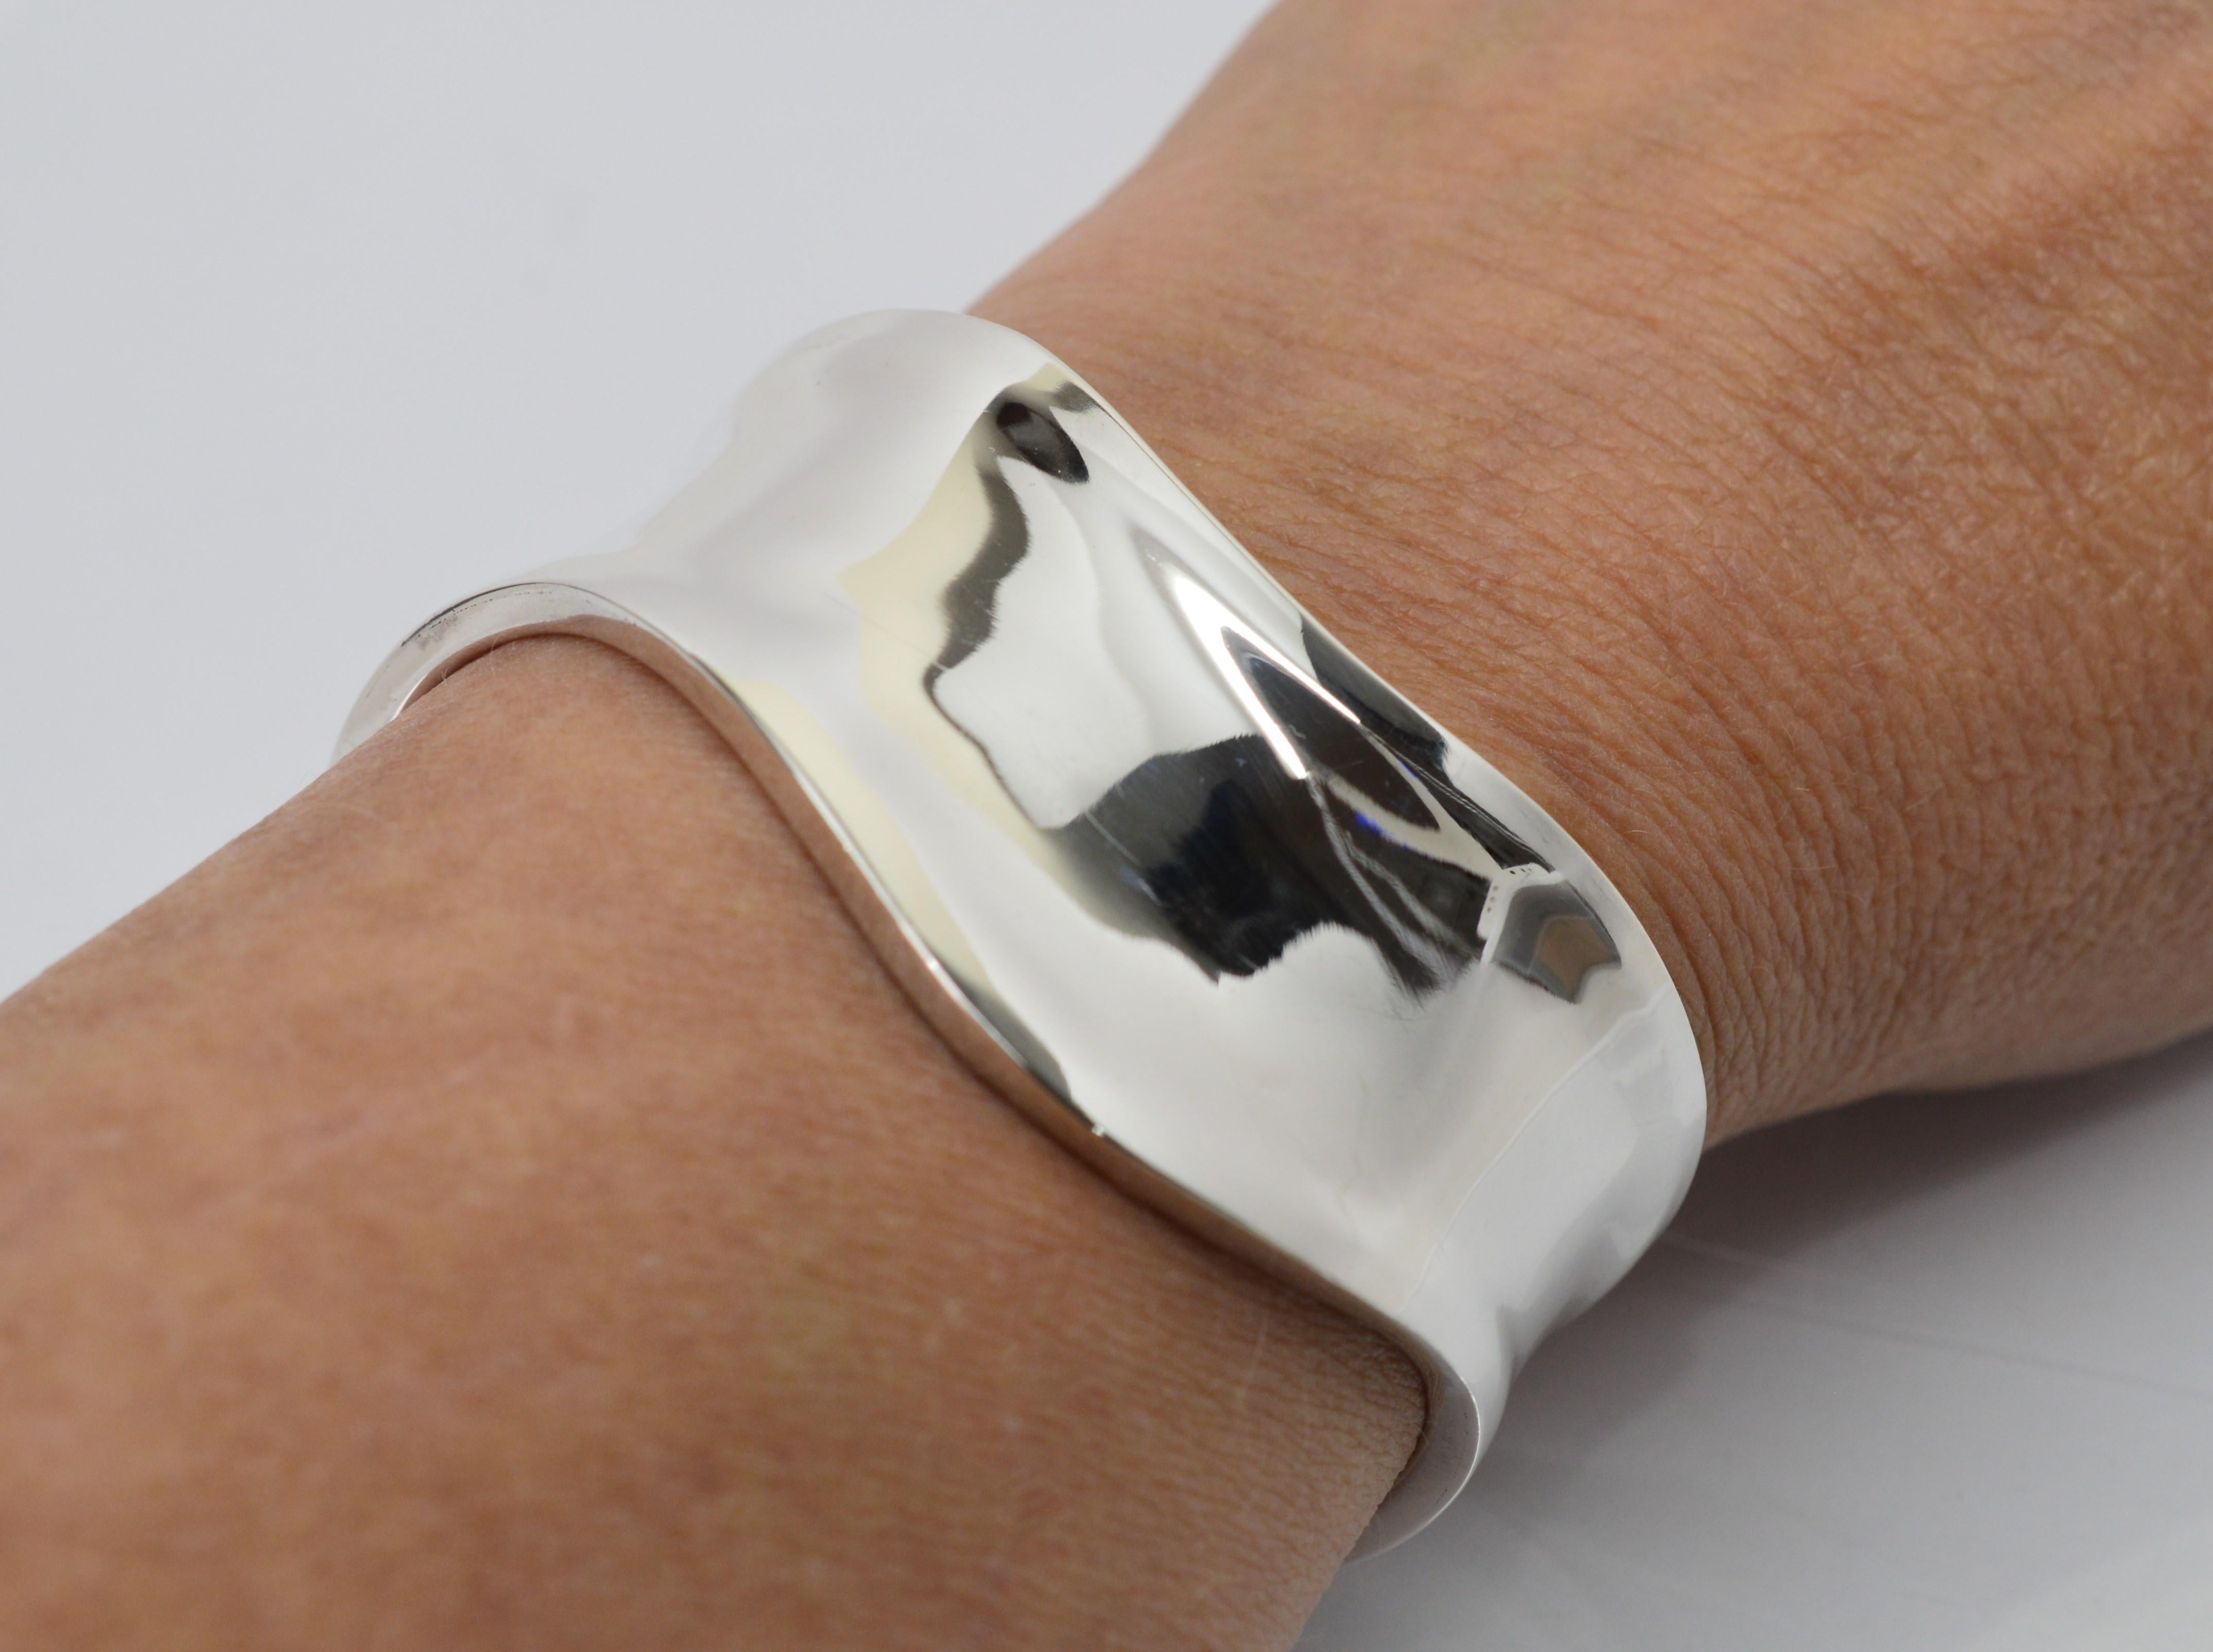 Like a wave of sterling silver flowing over the wrist, this 1 inch wide cuff bracelet makes a modern statement. The cuff measures 5-1/2 inch around plus has a 1-1/4 inch opening for a total inside measurement of 6-3/4 inches. Nicely polished,